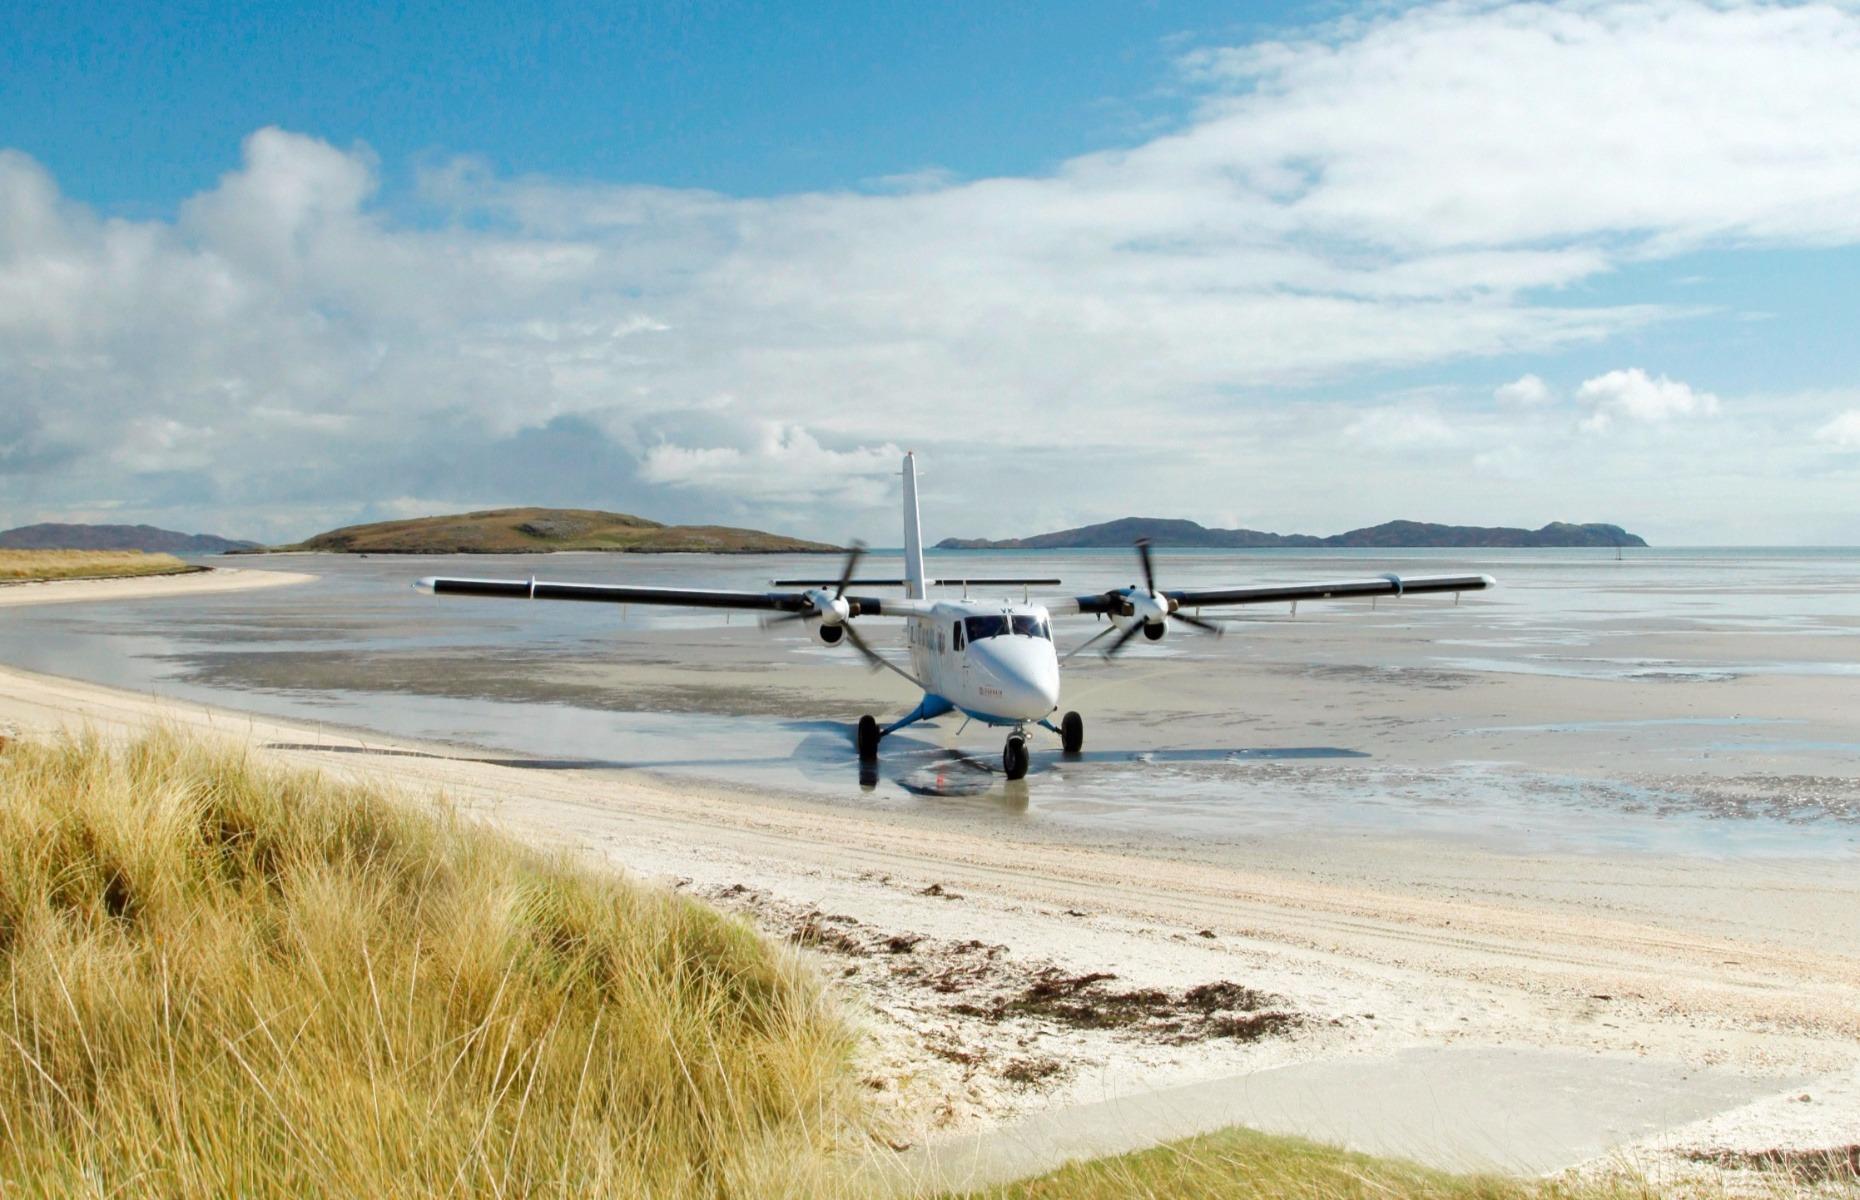 <p>Getting to the remote Scottish island of Barra, in the Outer Hebrides, is as much an adventure as exploring the island itself. The airport here is the only one in the world to use a beach as its runway for scheduled flights – so you step out of your small plane and right onto the sand.</p>  <p><a href="https://www.loveexploring.com/galleries/63818/the-worlds-coolest-airports?page=1"><strong>These are the world's coolest airports</strong></a></p>